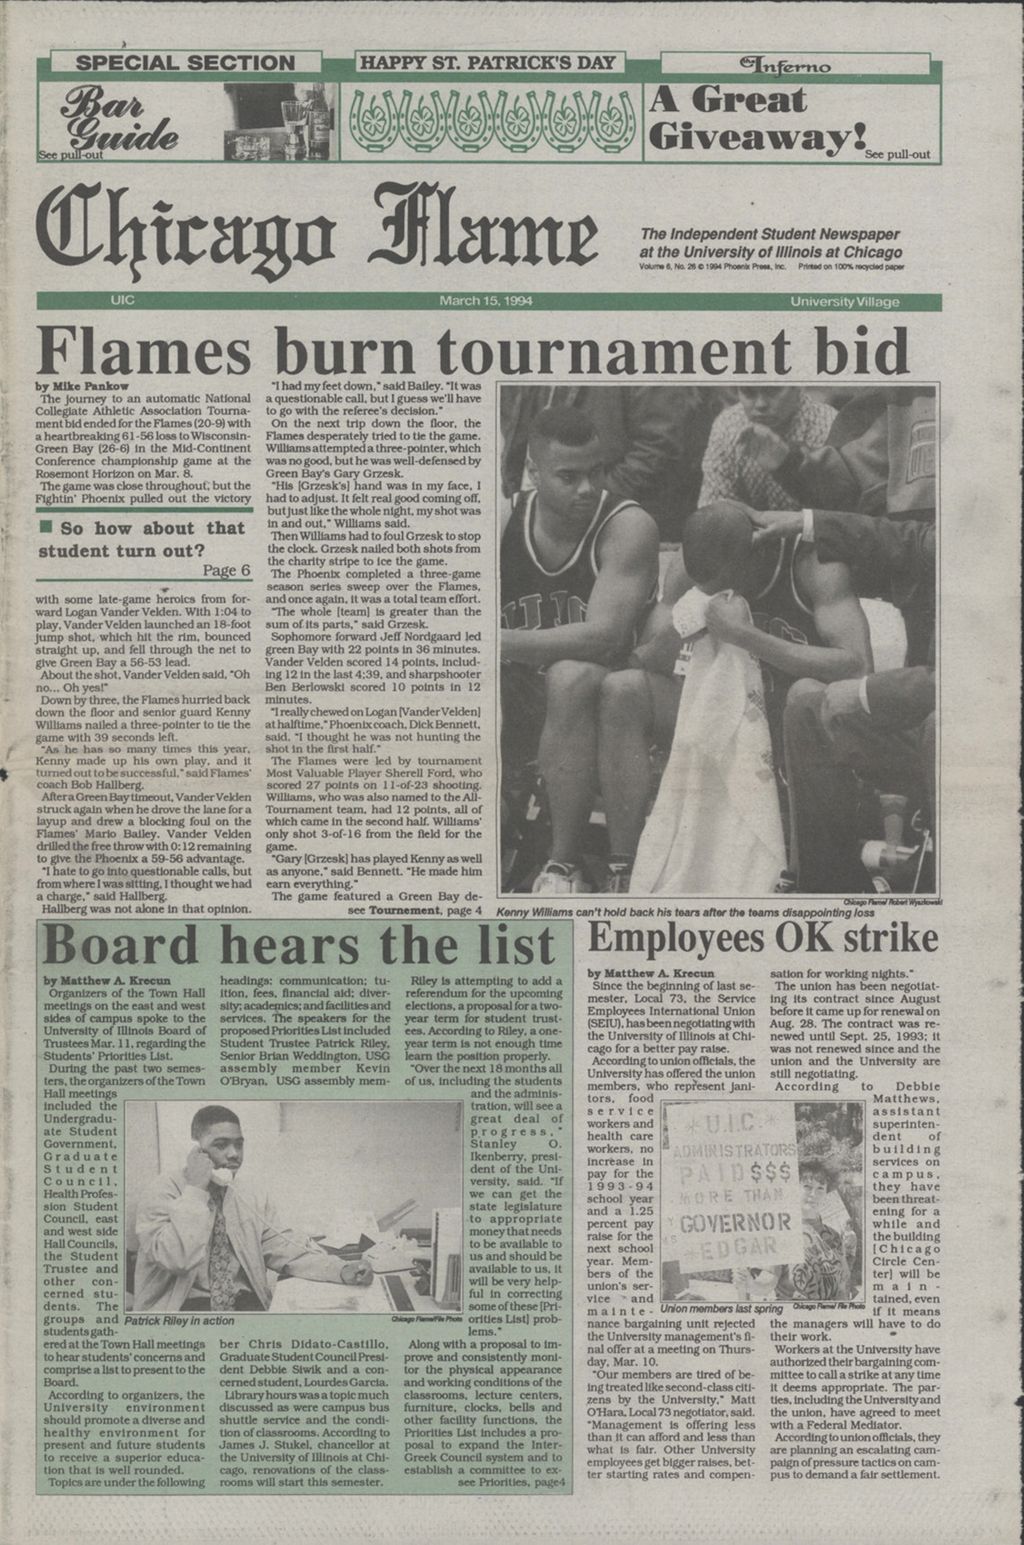 Miniature of Chicago Flame (March 15, 1994)